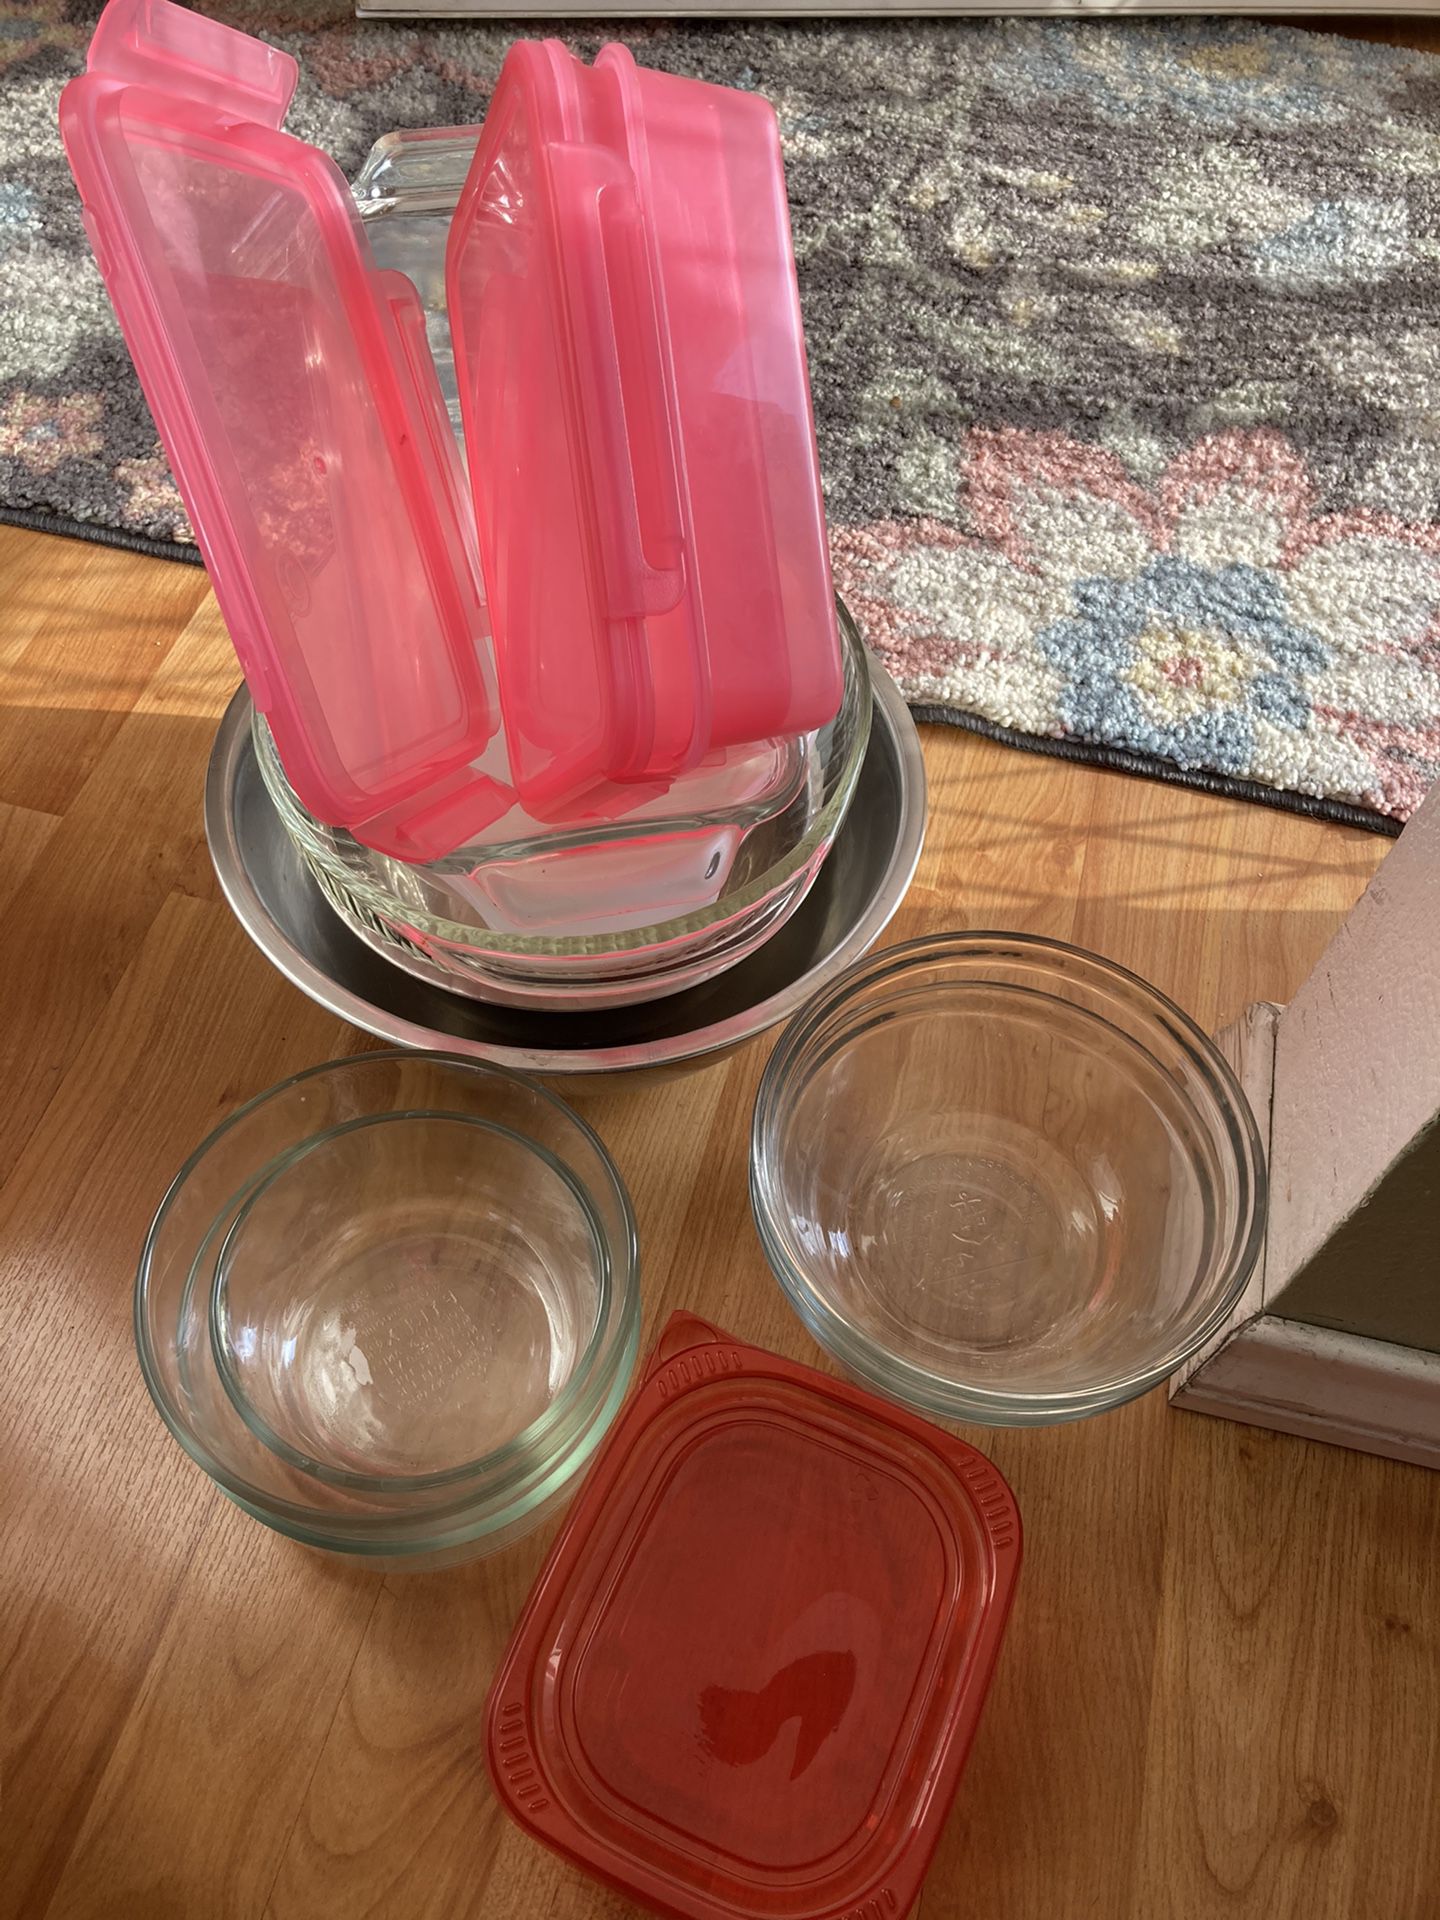 Pyrex baking dishes, plastic containers, Copco plastic ware